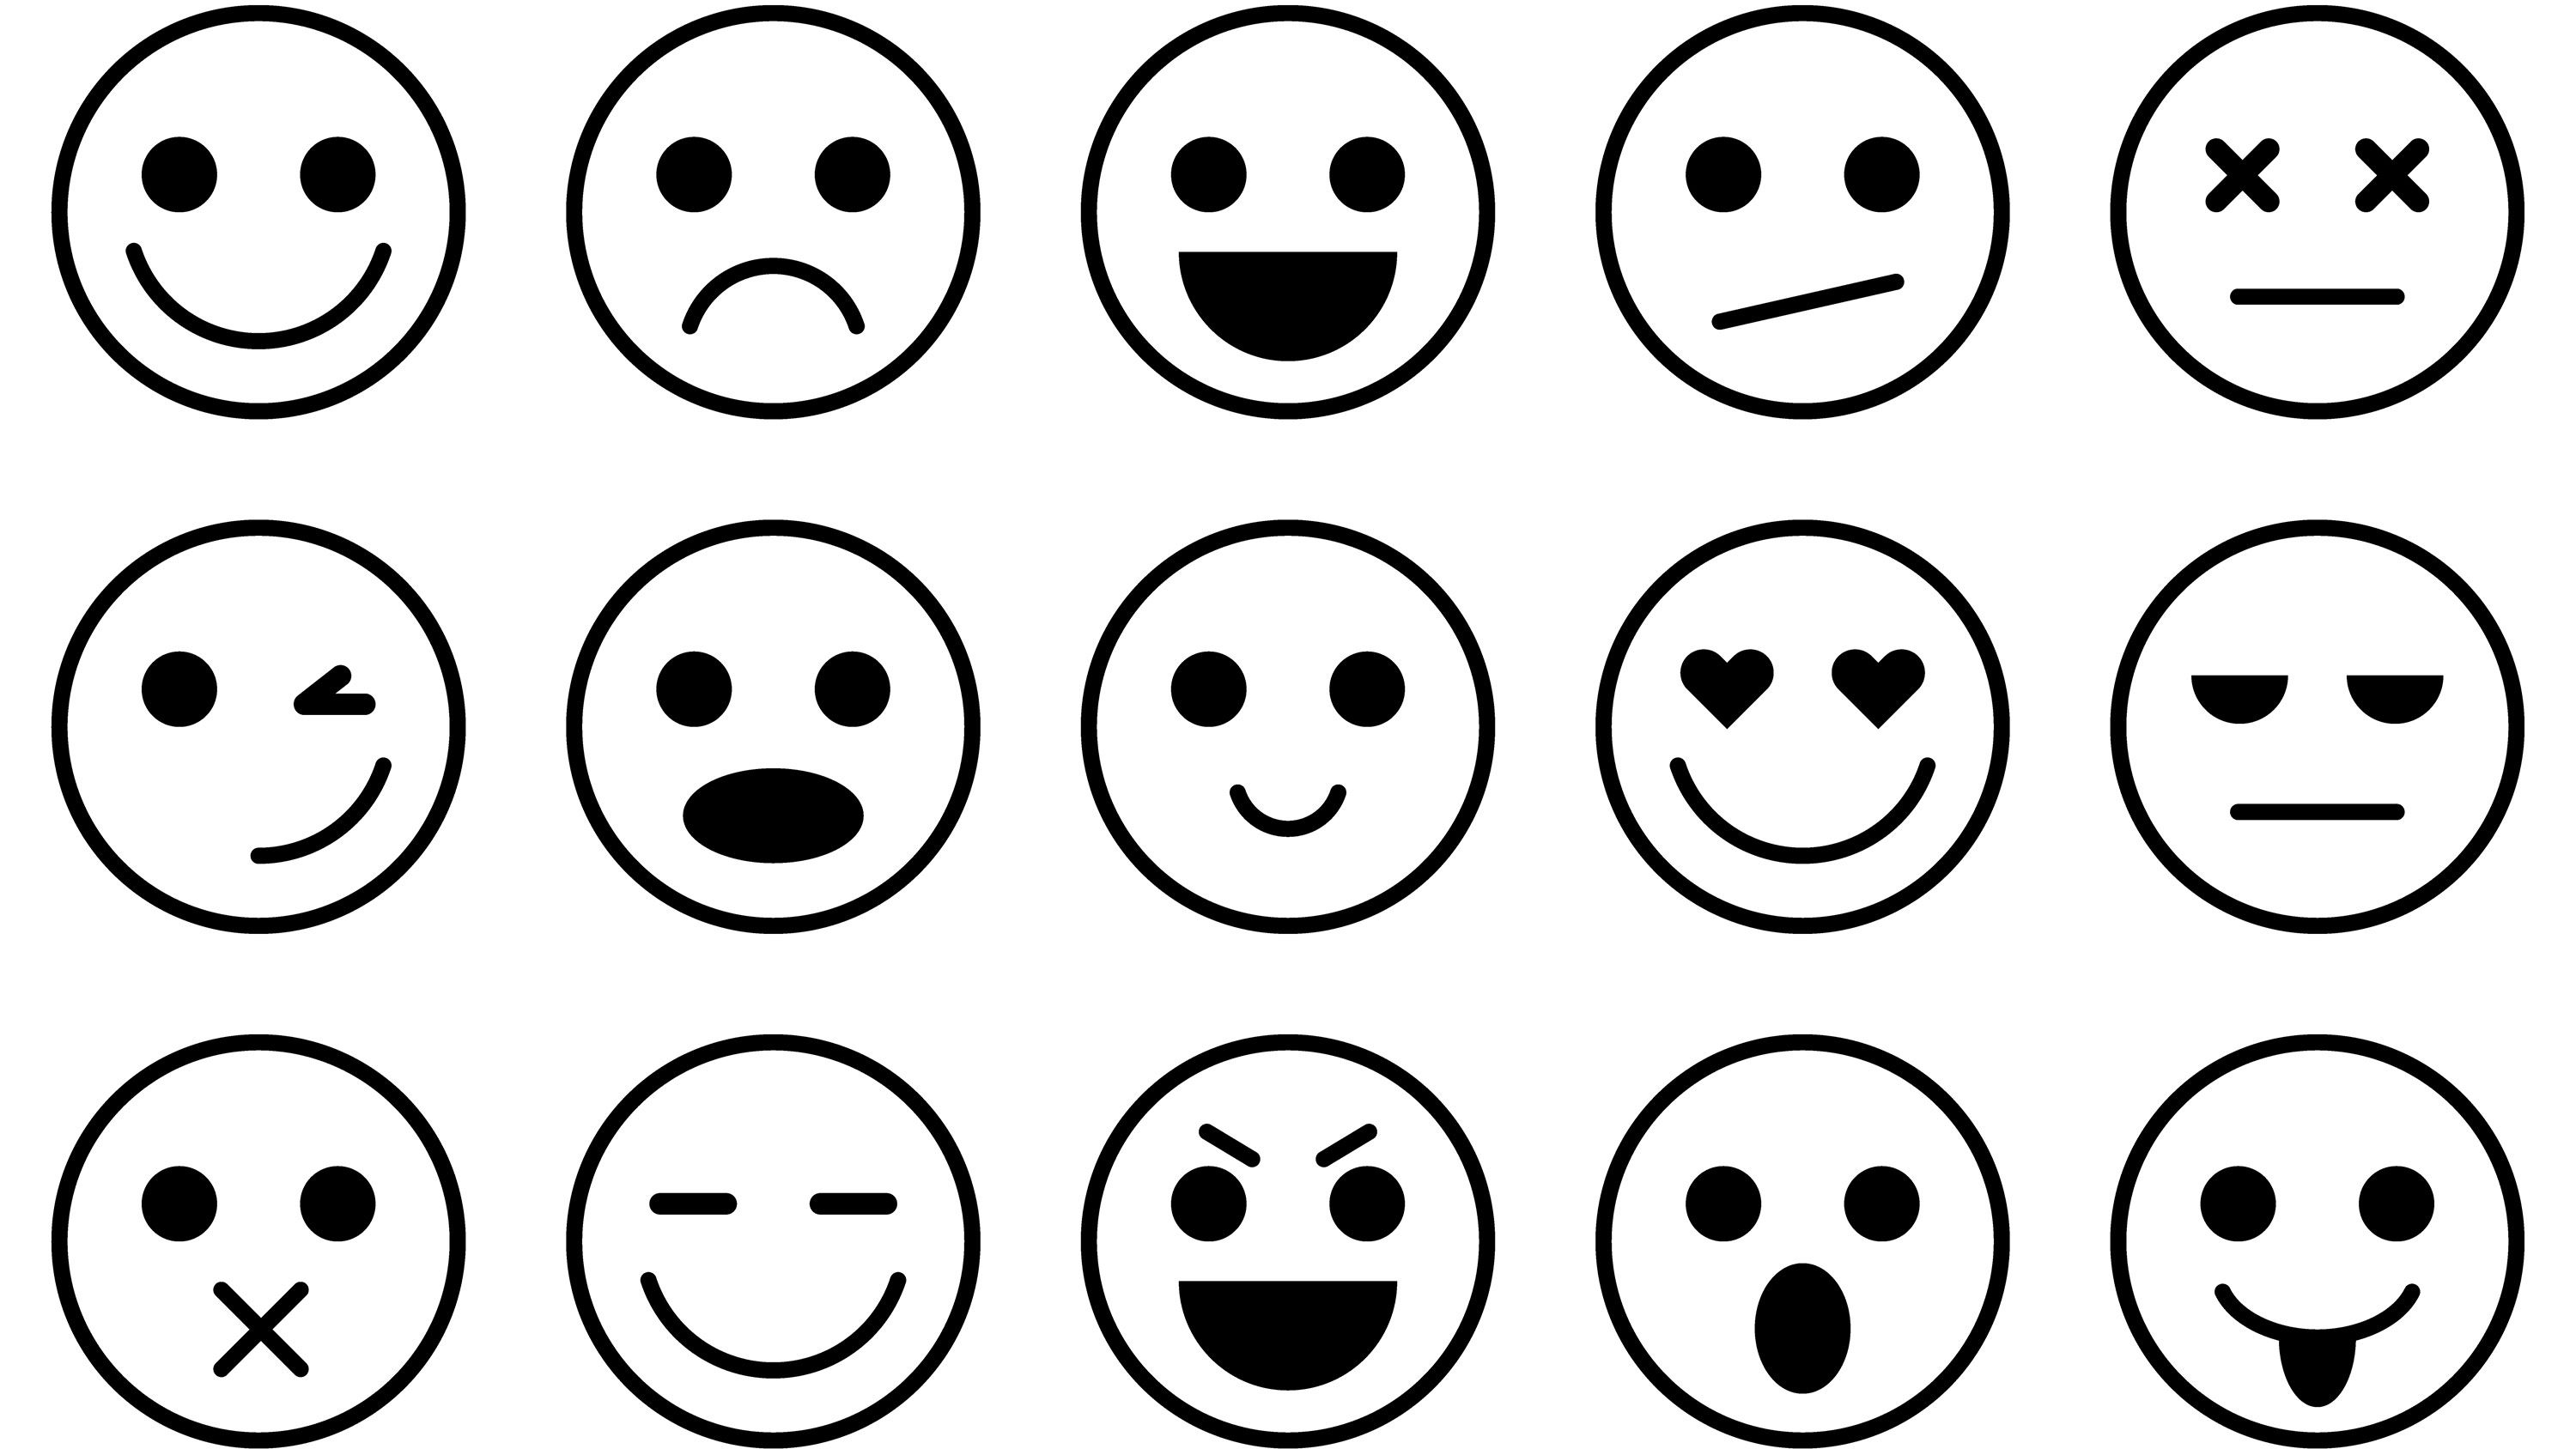 different emotion smiley faces